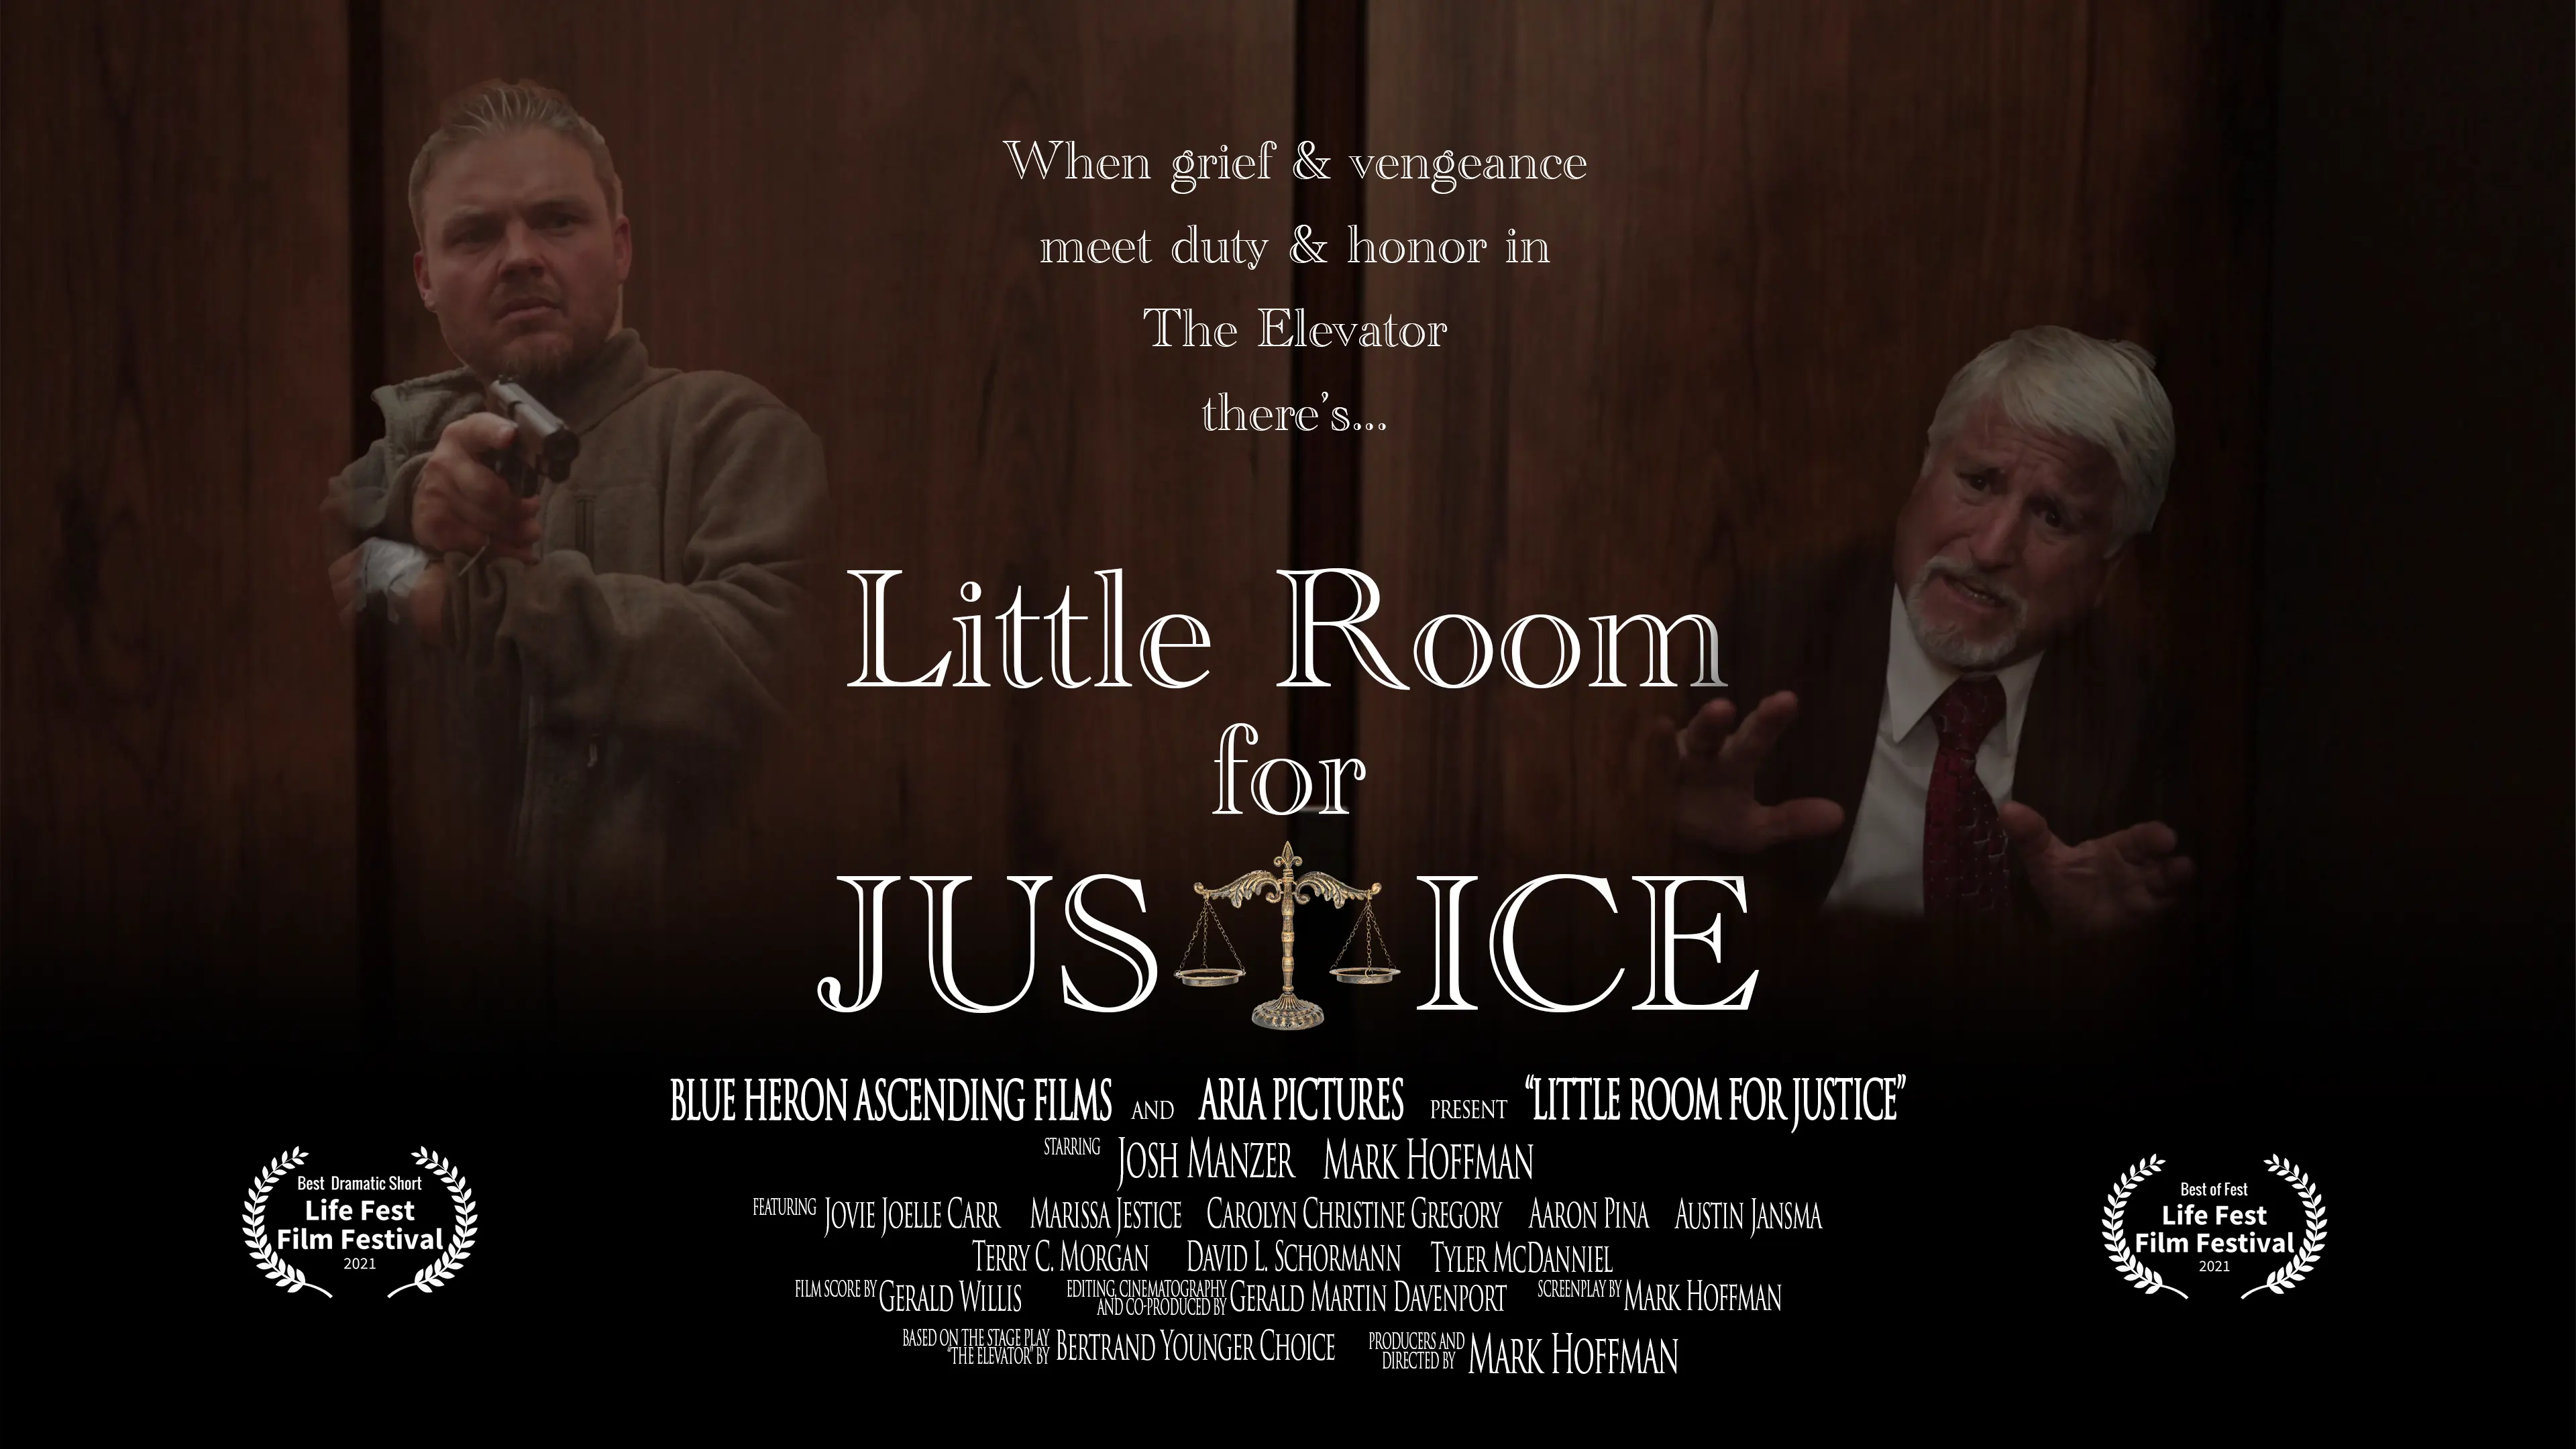 Little Room For Justice (2021) title card for completed film.